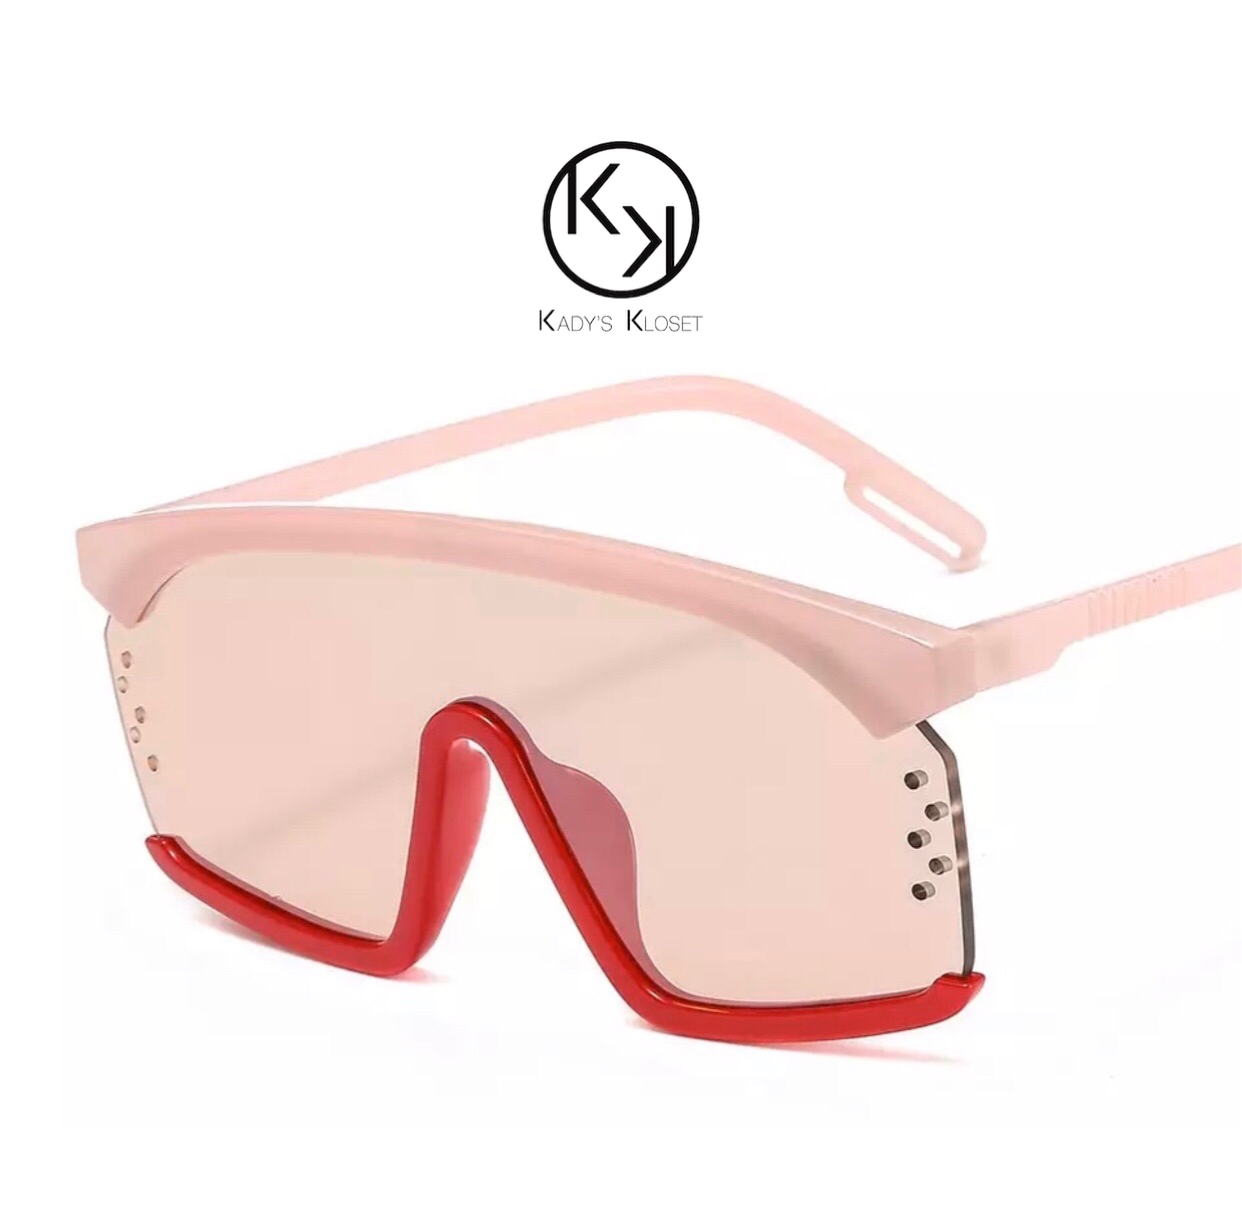 Elevate your style with Katrina Shades from Kady's Kloset. Designed for comfort and fashion, these lightweight shades offer effortless elegance